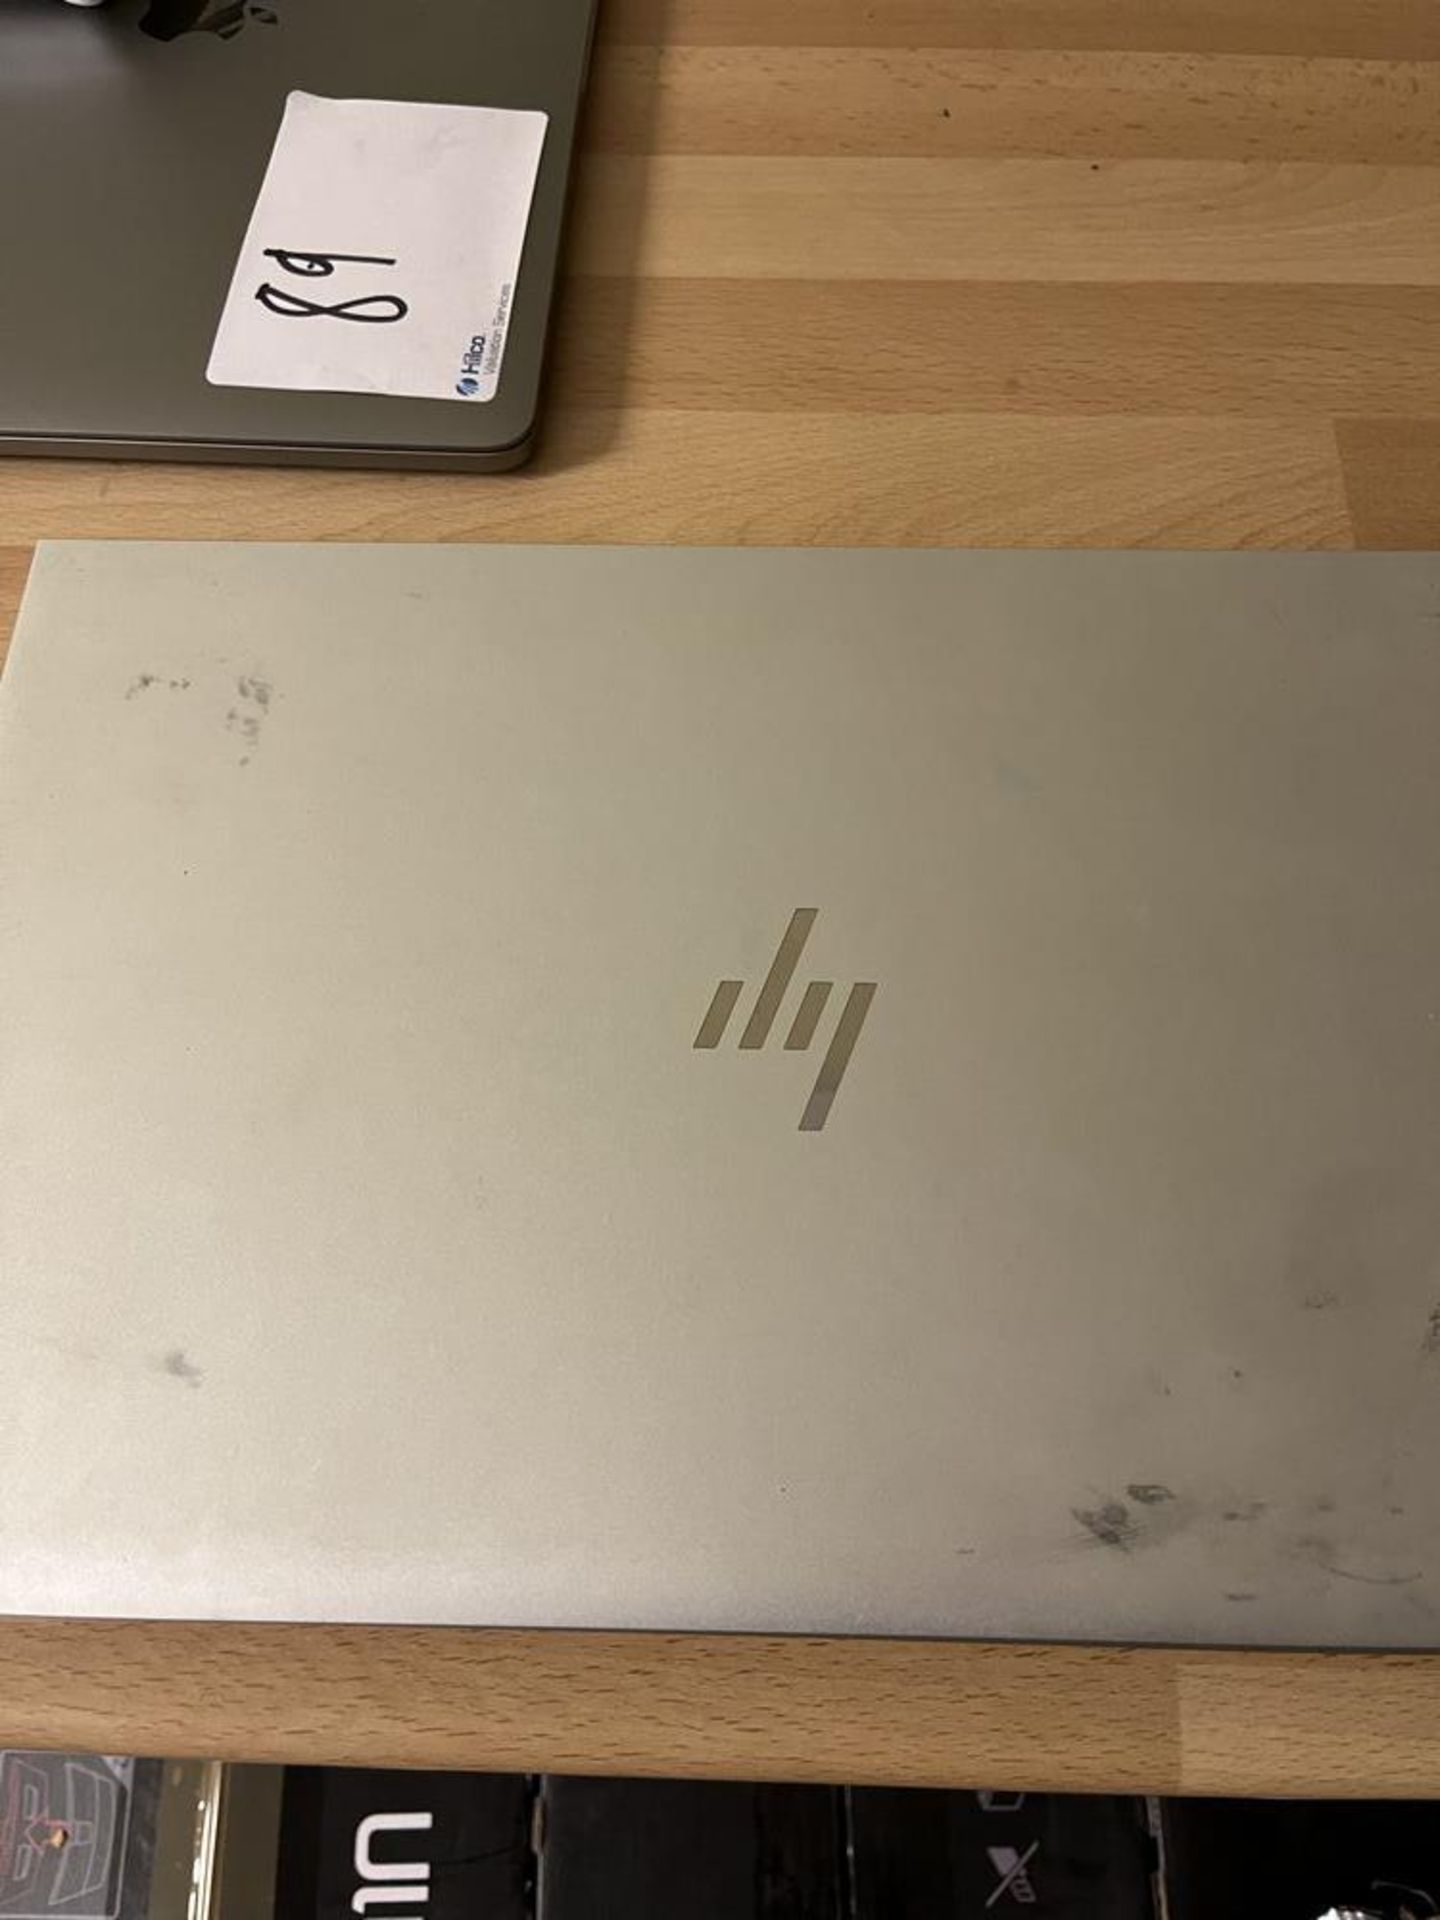 HP EliteBook 840 G8 Core i7 Notebook PC No charger, cosmetic wear on top Serial Number 5CG1436S5Y - Image 2 of 2